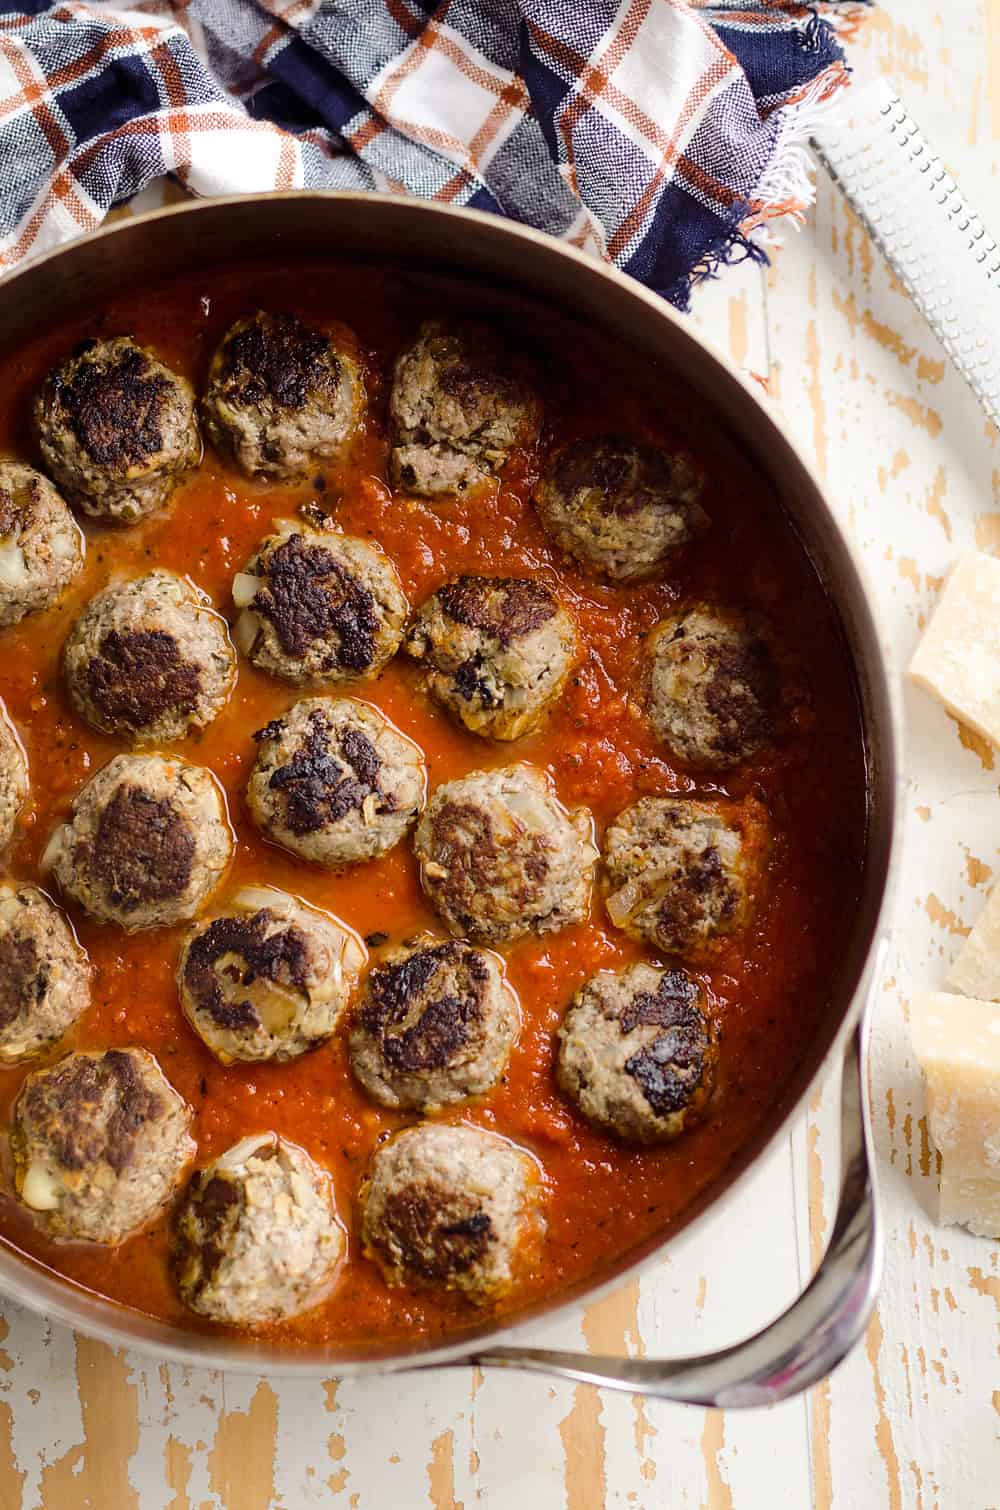 Provolone Stuffed Pesto Meatball Skillet is a hearty dinner made with classic Italian flavors. Provolone cheese is stuffed inside lean hamburger and simmered in marinara for a healthy dinner idea the whole family will love. 